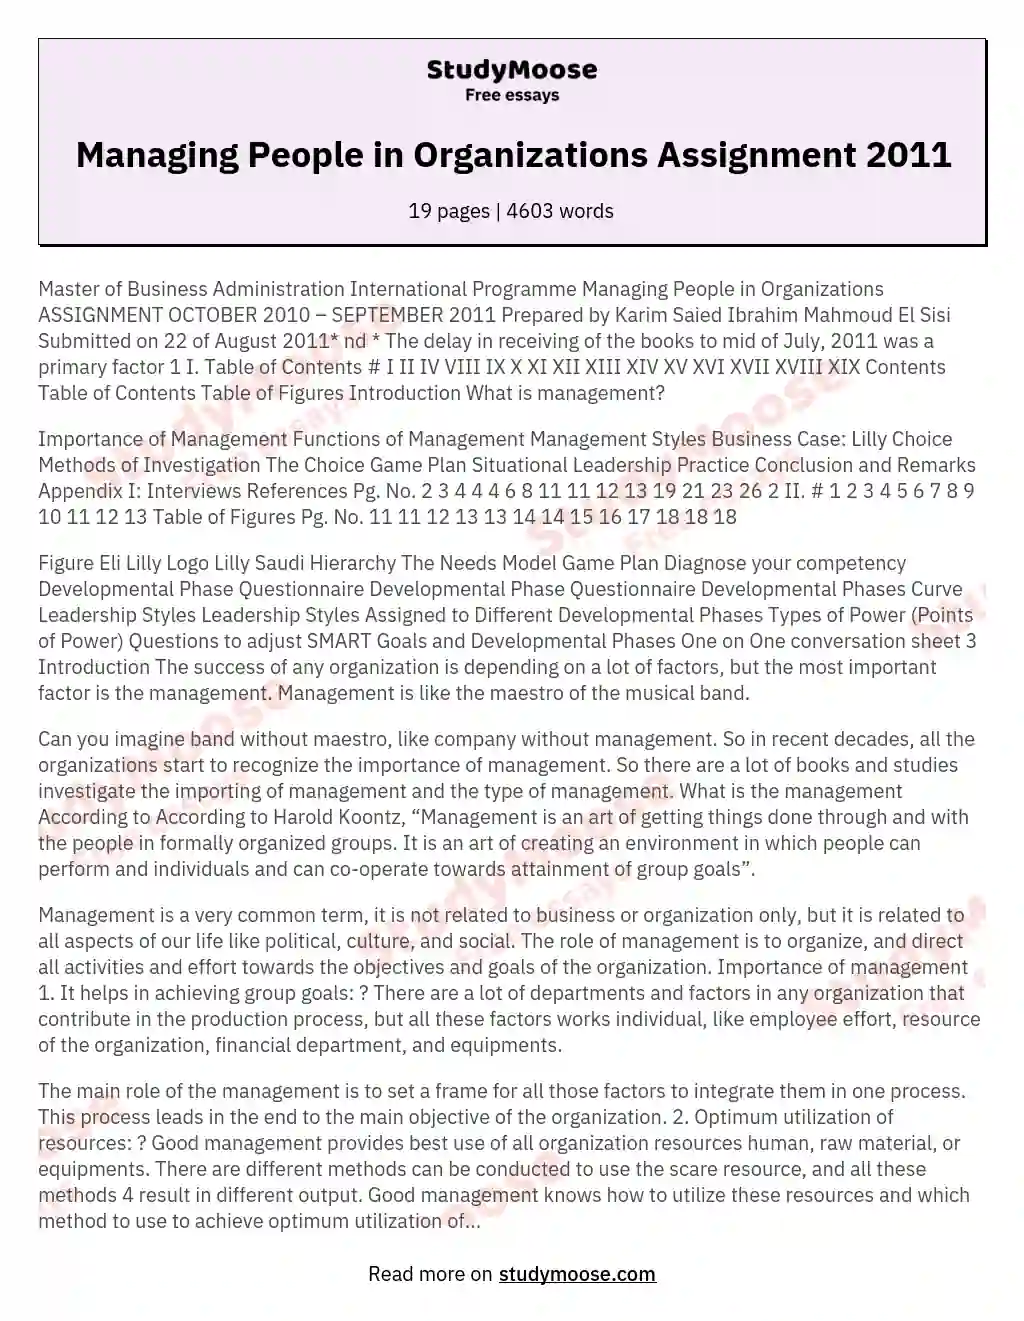 Managing People in Organizations Assignment 2011